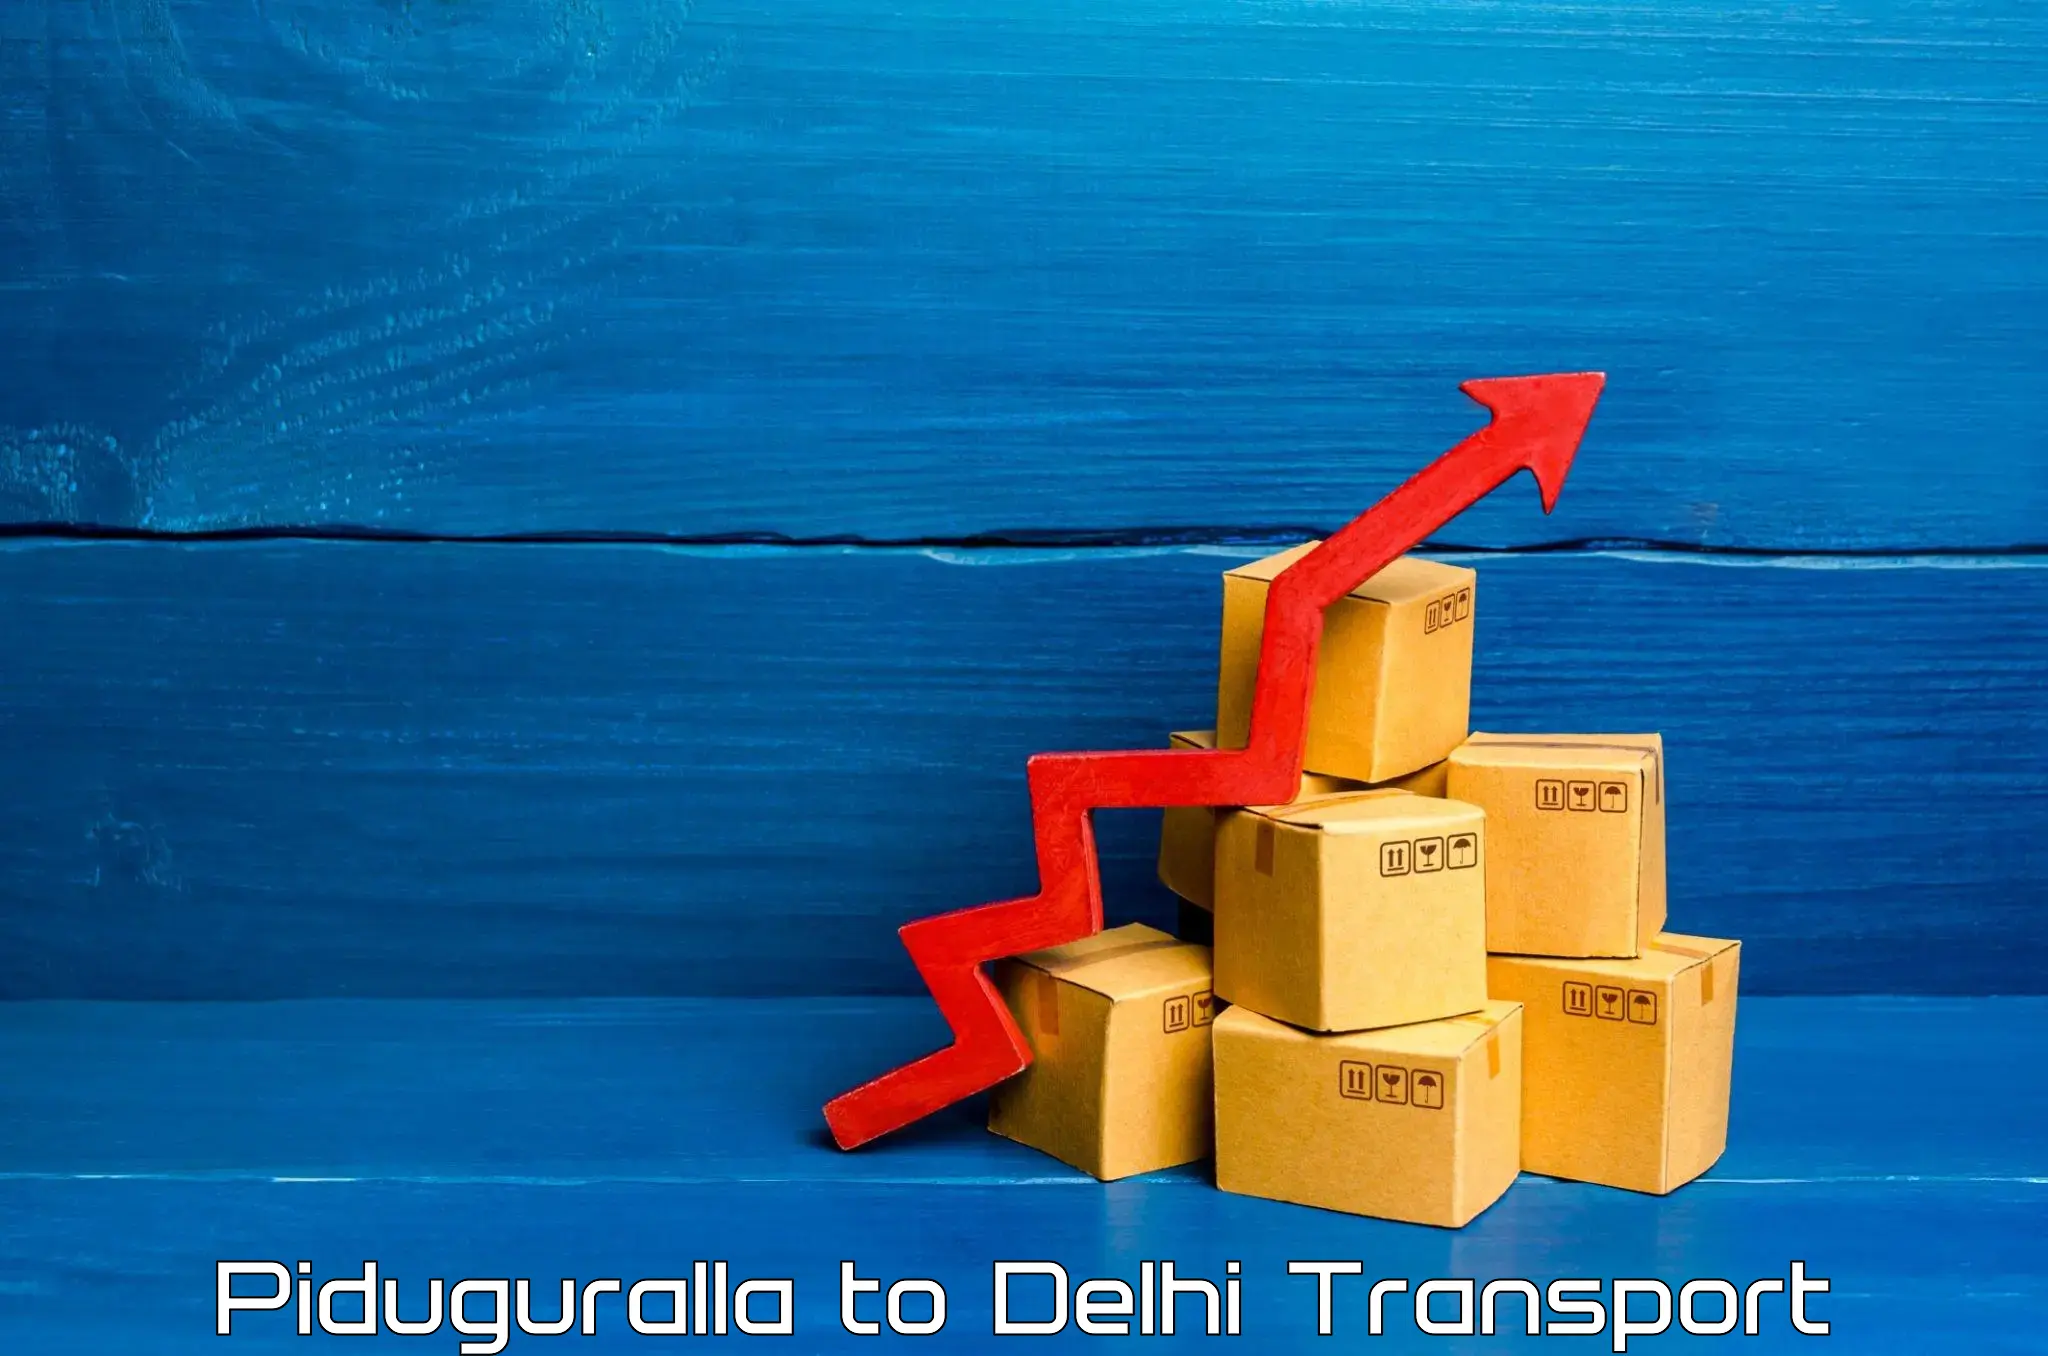 Part load transport service in India Piduguralla to NCR